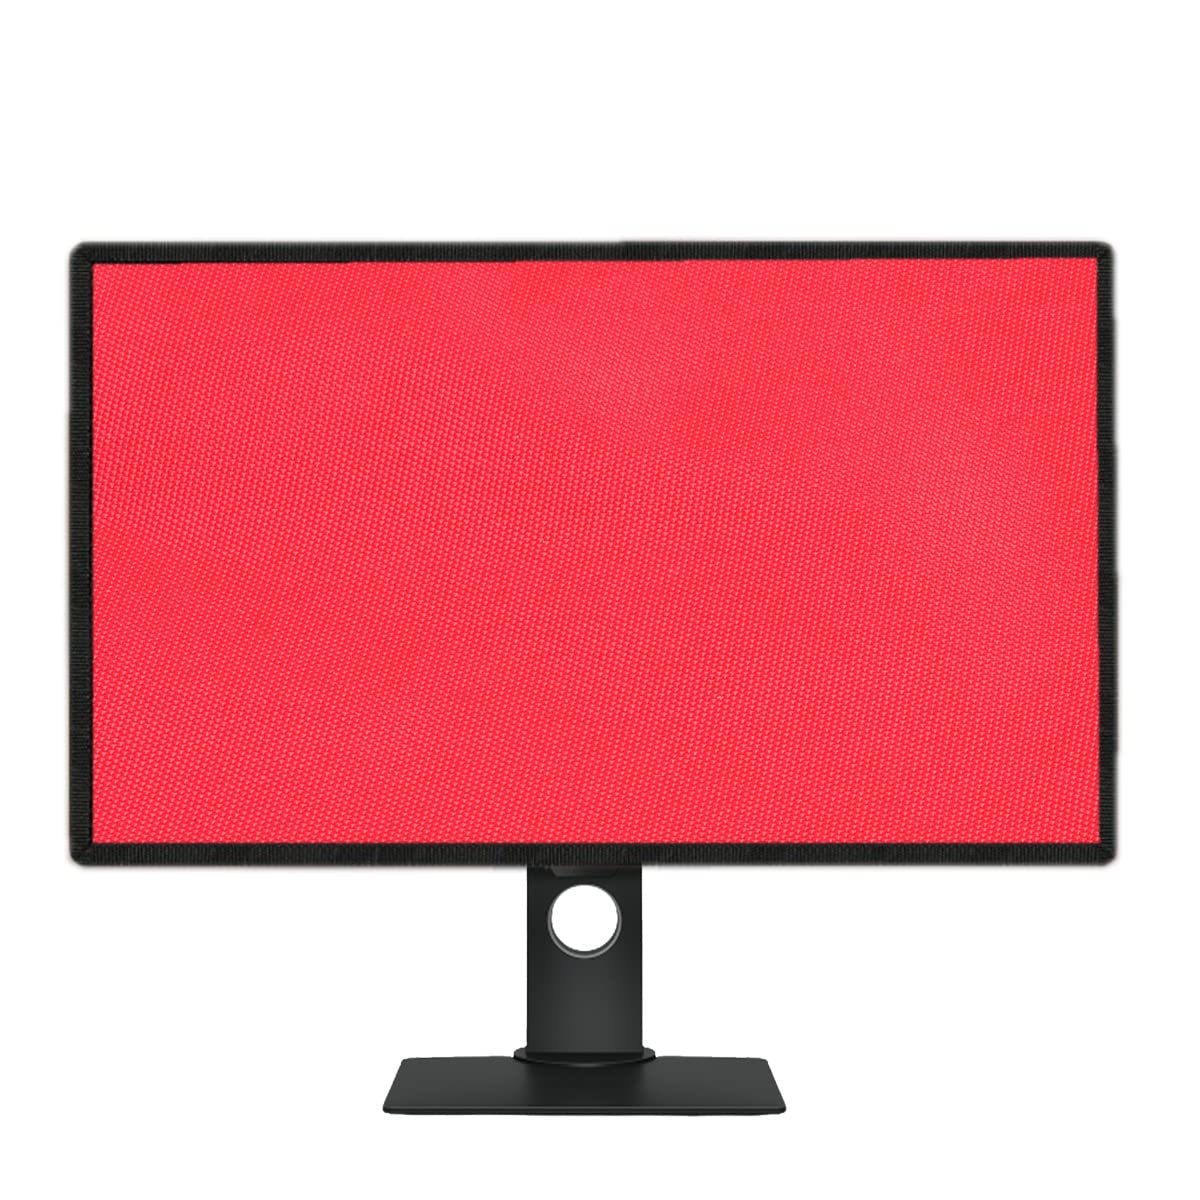 PalaP Super Premium Dust Proof Monitor Cover for Philips 27 inches Monitor (RED)